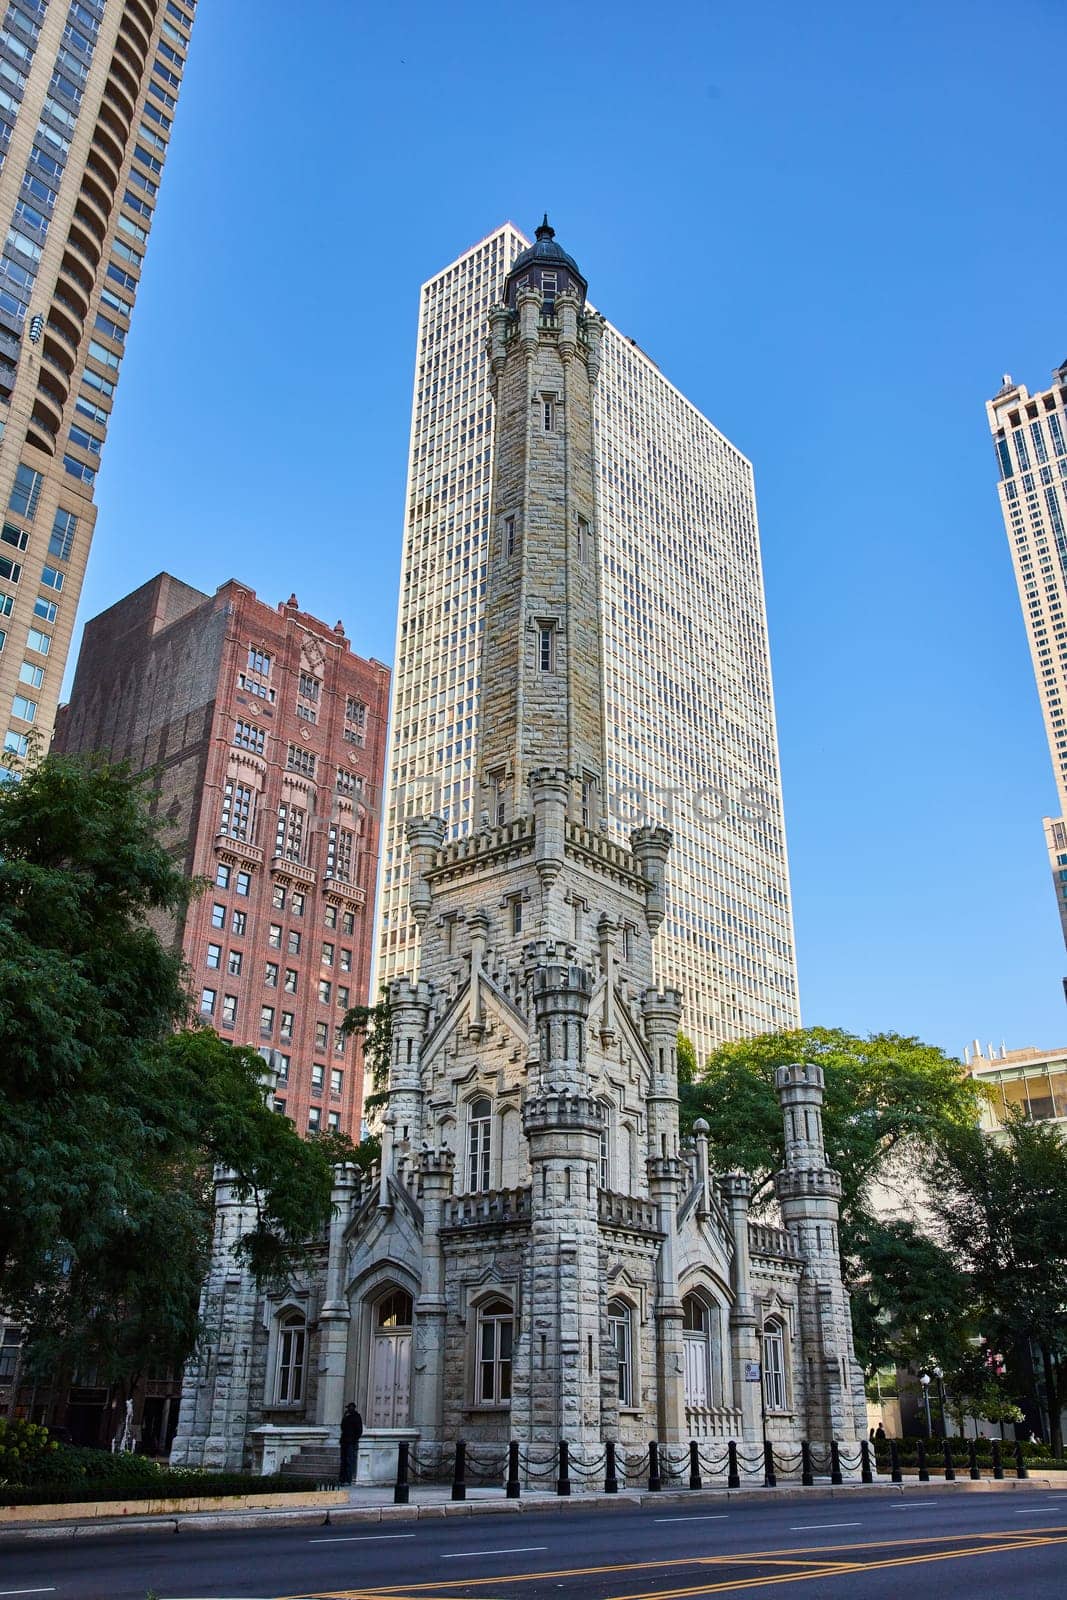 Old, historic, original Chicago water tower with castle architecture under blue sky amid skyscrapers by njproductions